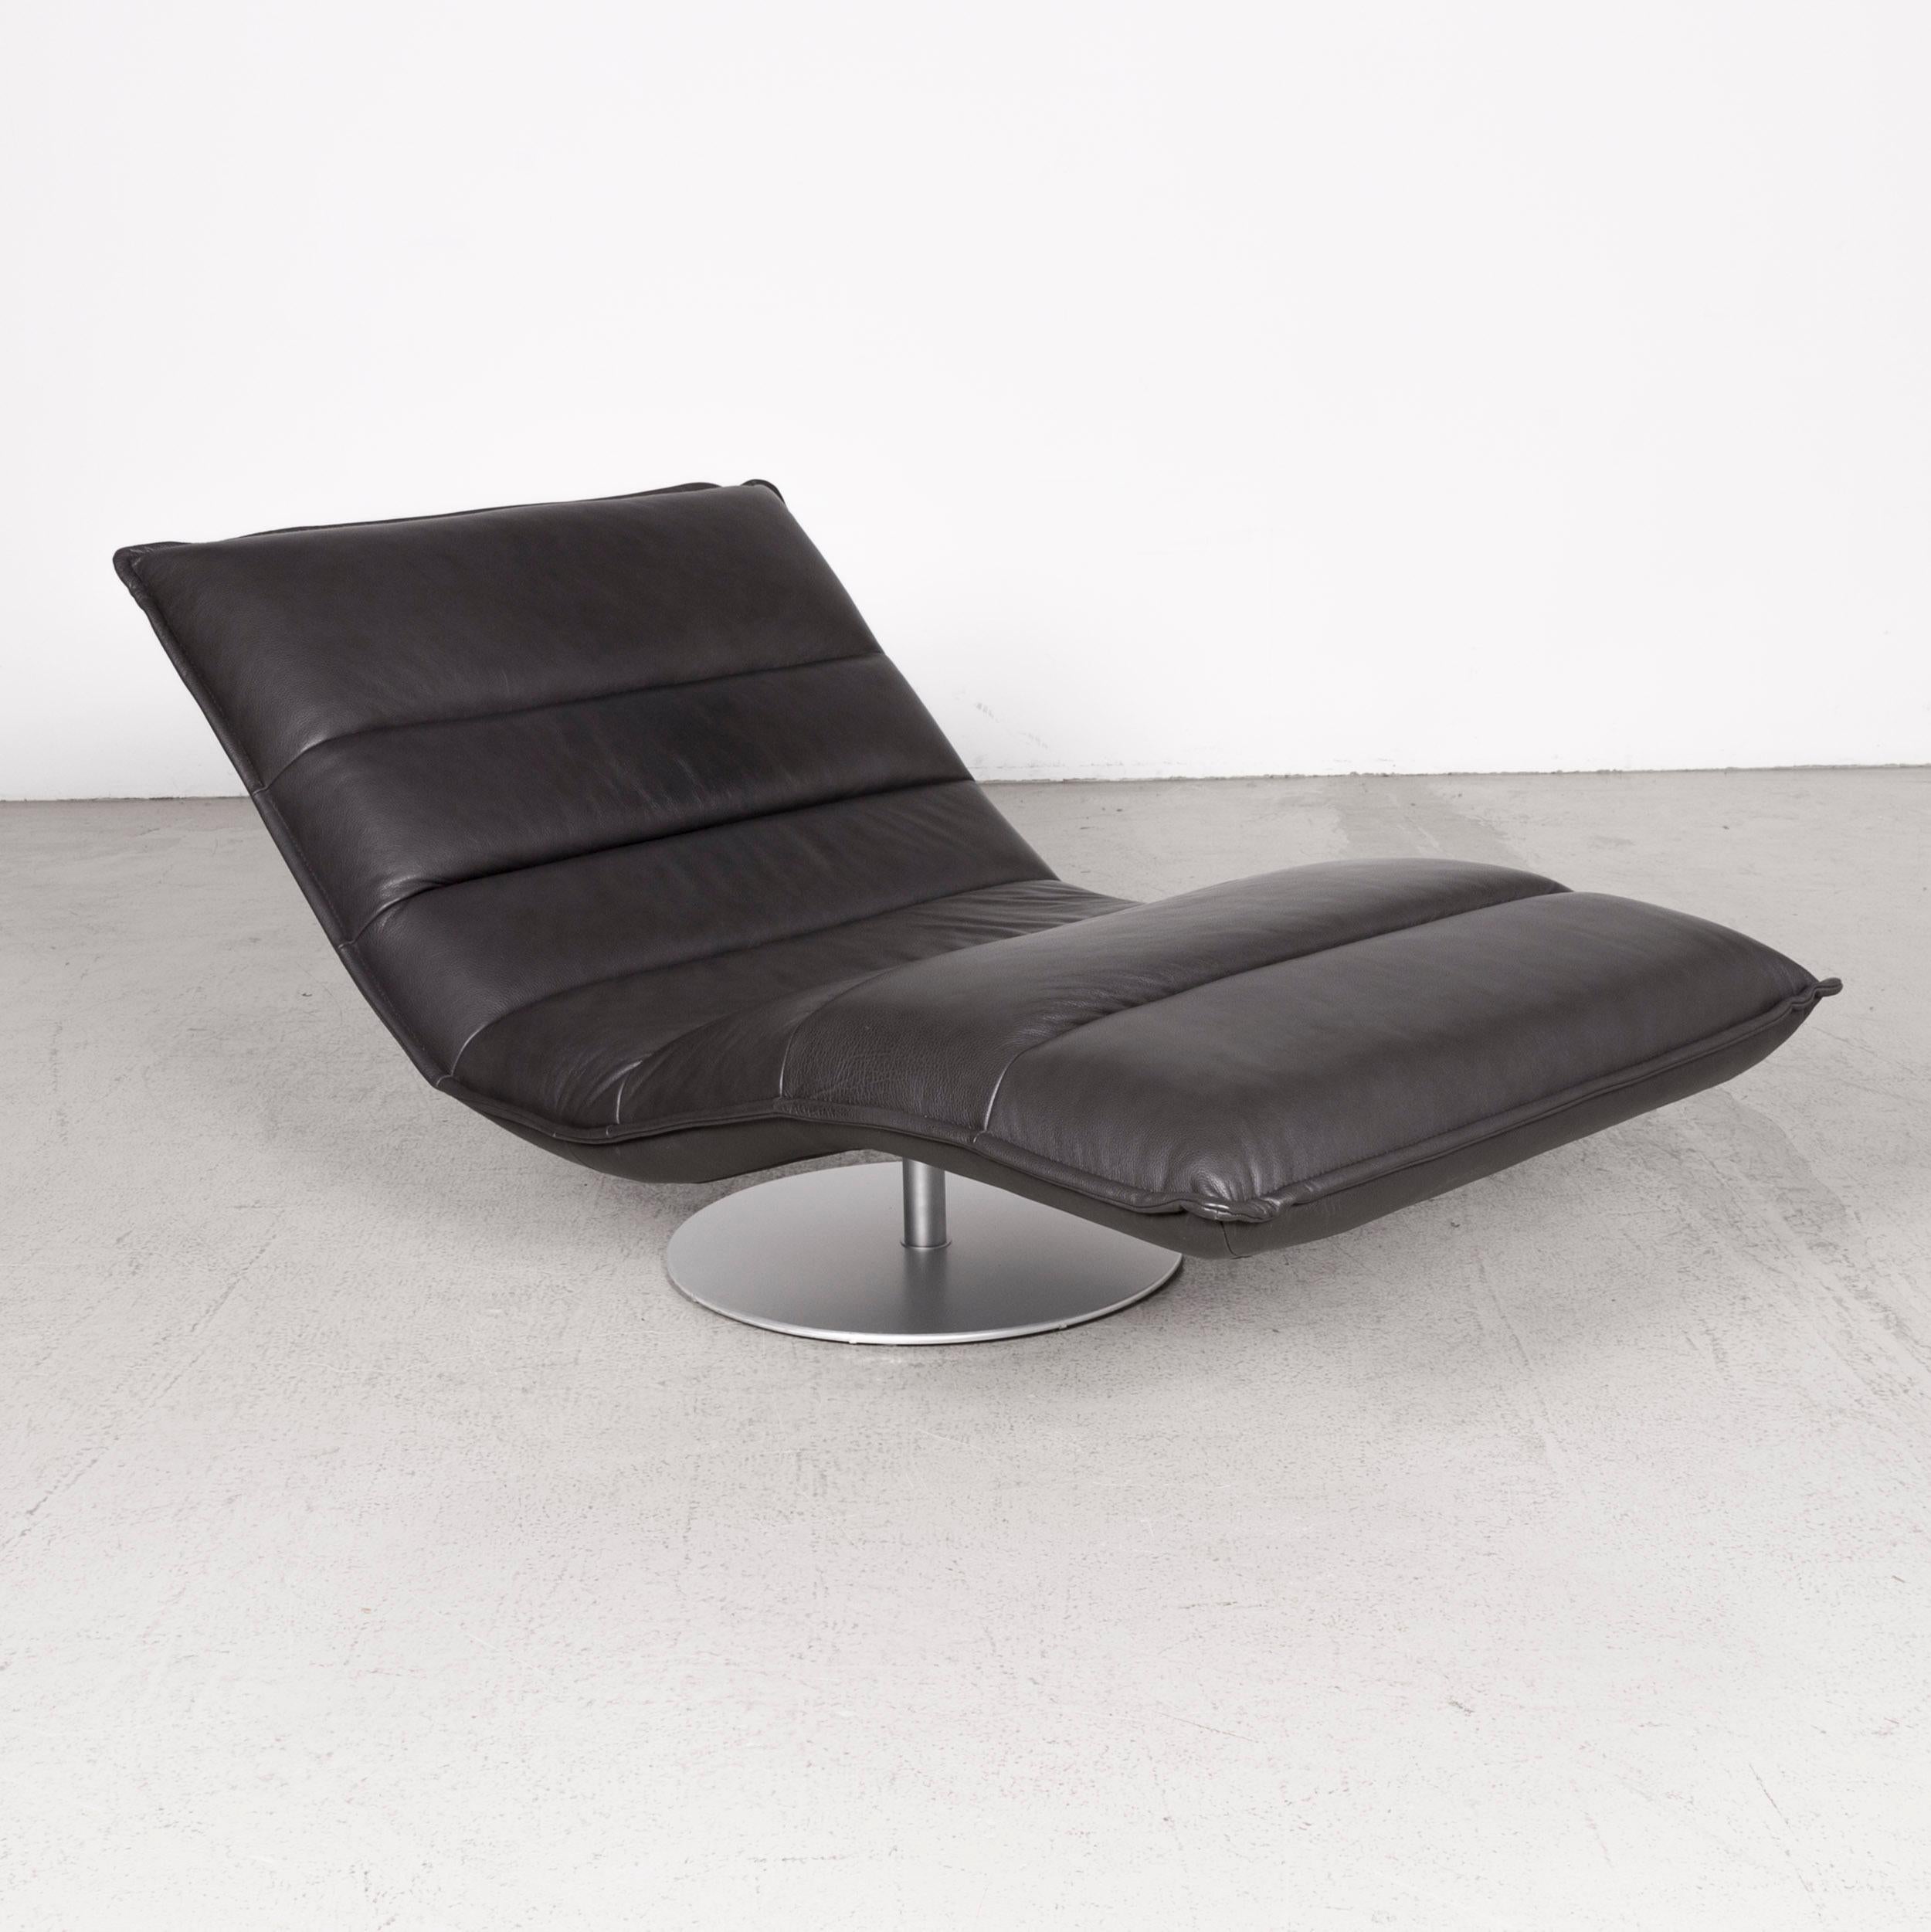 Willi Schillig Inkoognito Leather Lounger Anthracite Genuine Leather In Excellent Condition For Sale In Cologne, DE